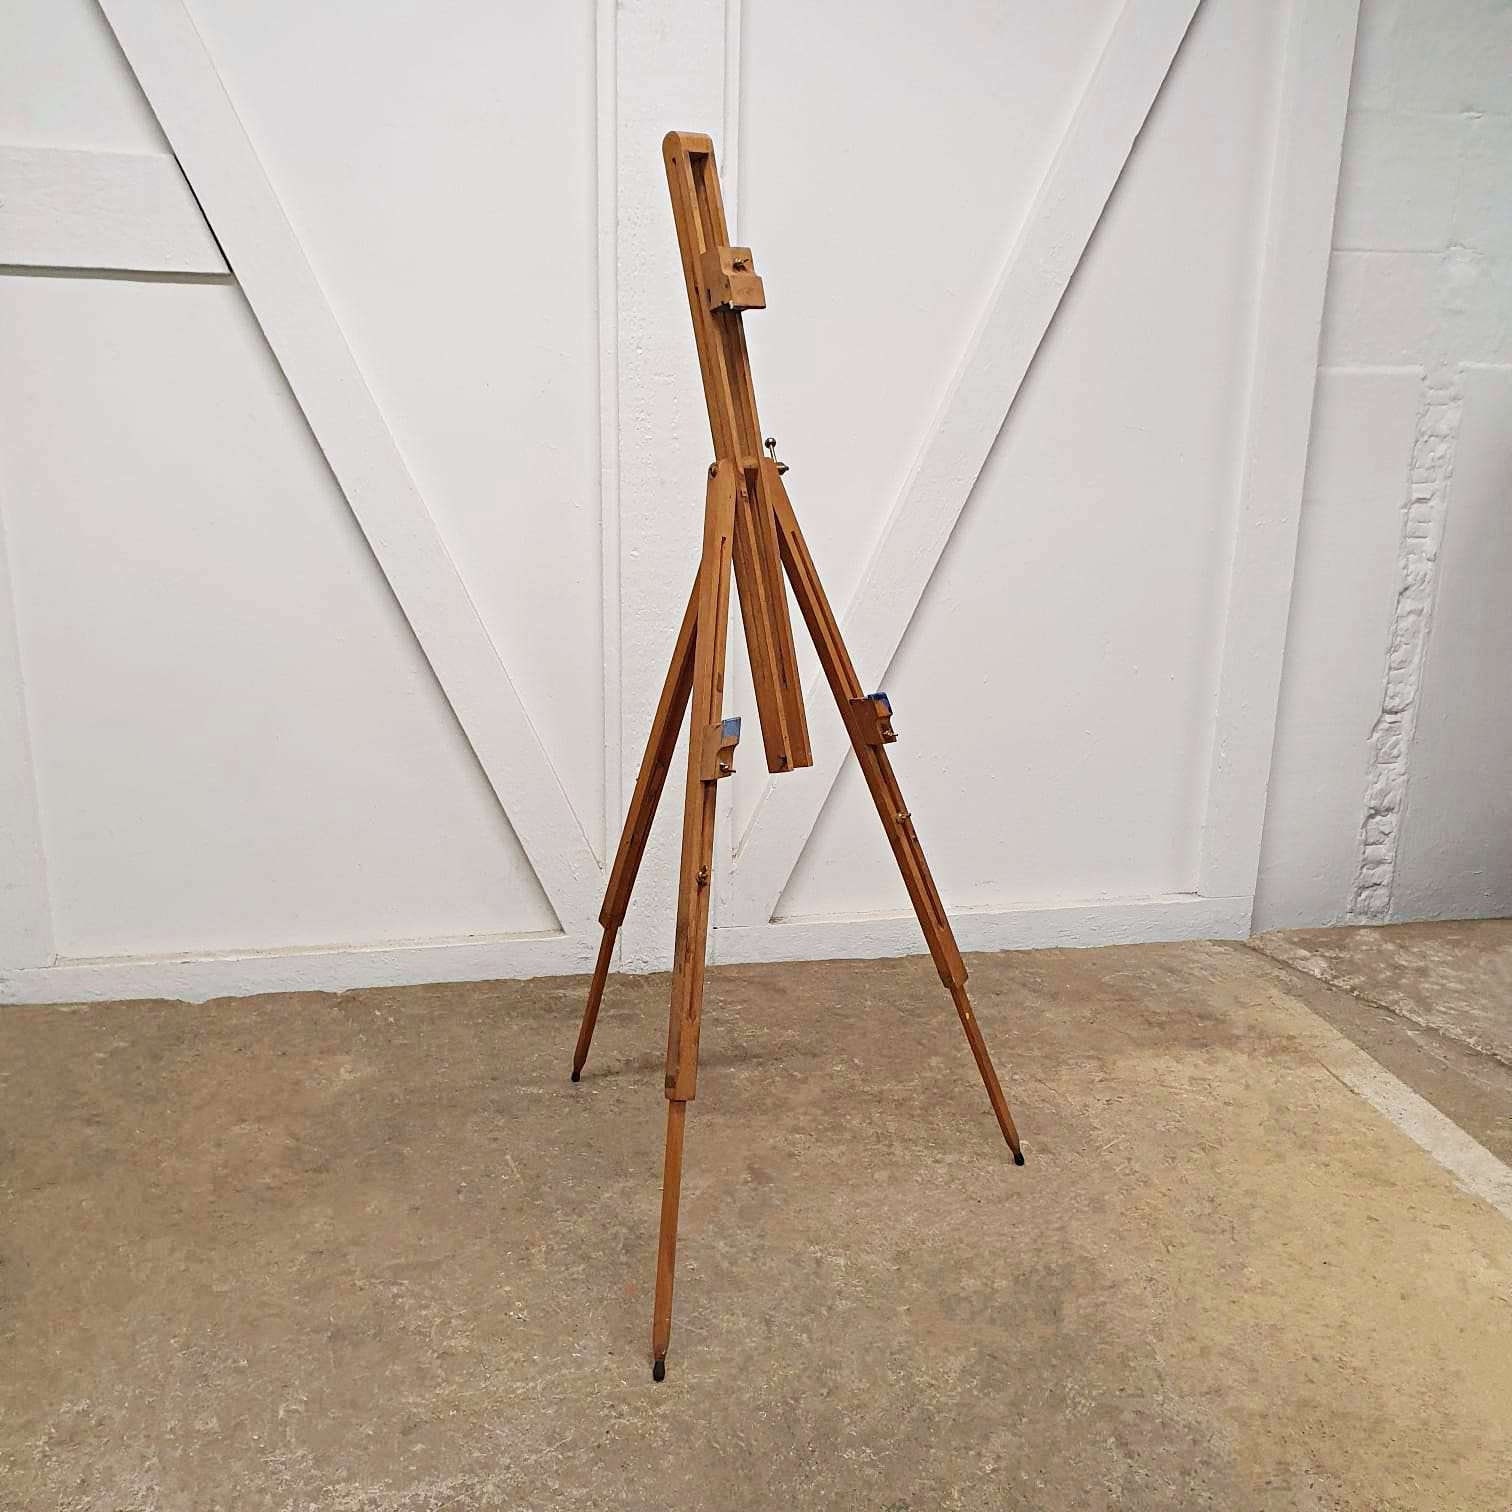 Wooden Easel for Sketching and Painting or Use as a Display Easel wedding  Plans Etc Blackboard Holder, S1 Blue 